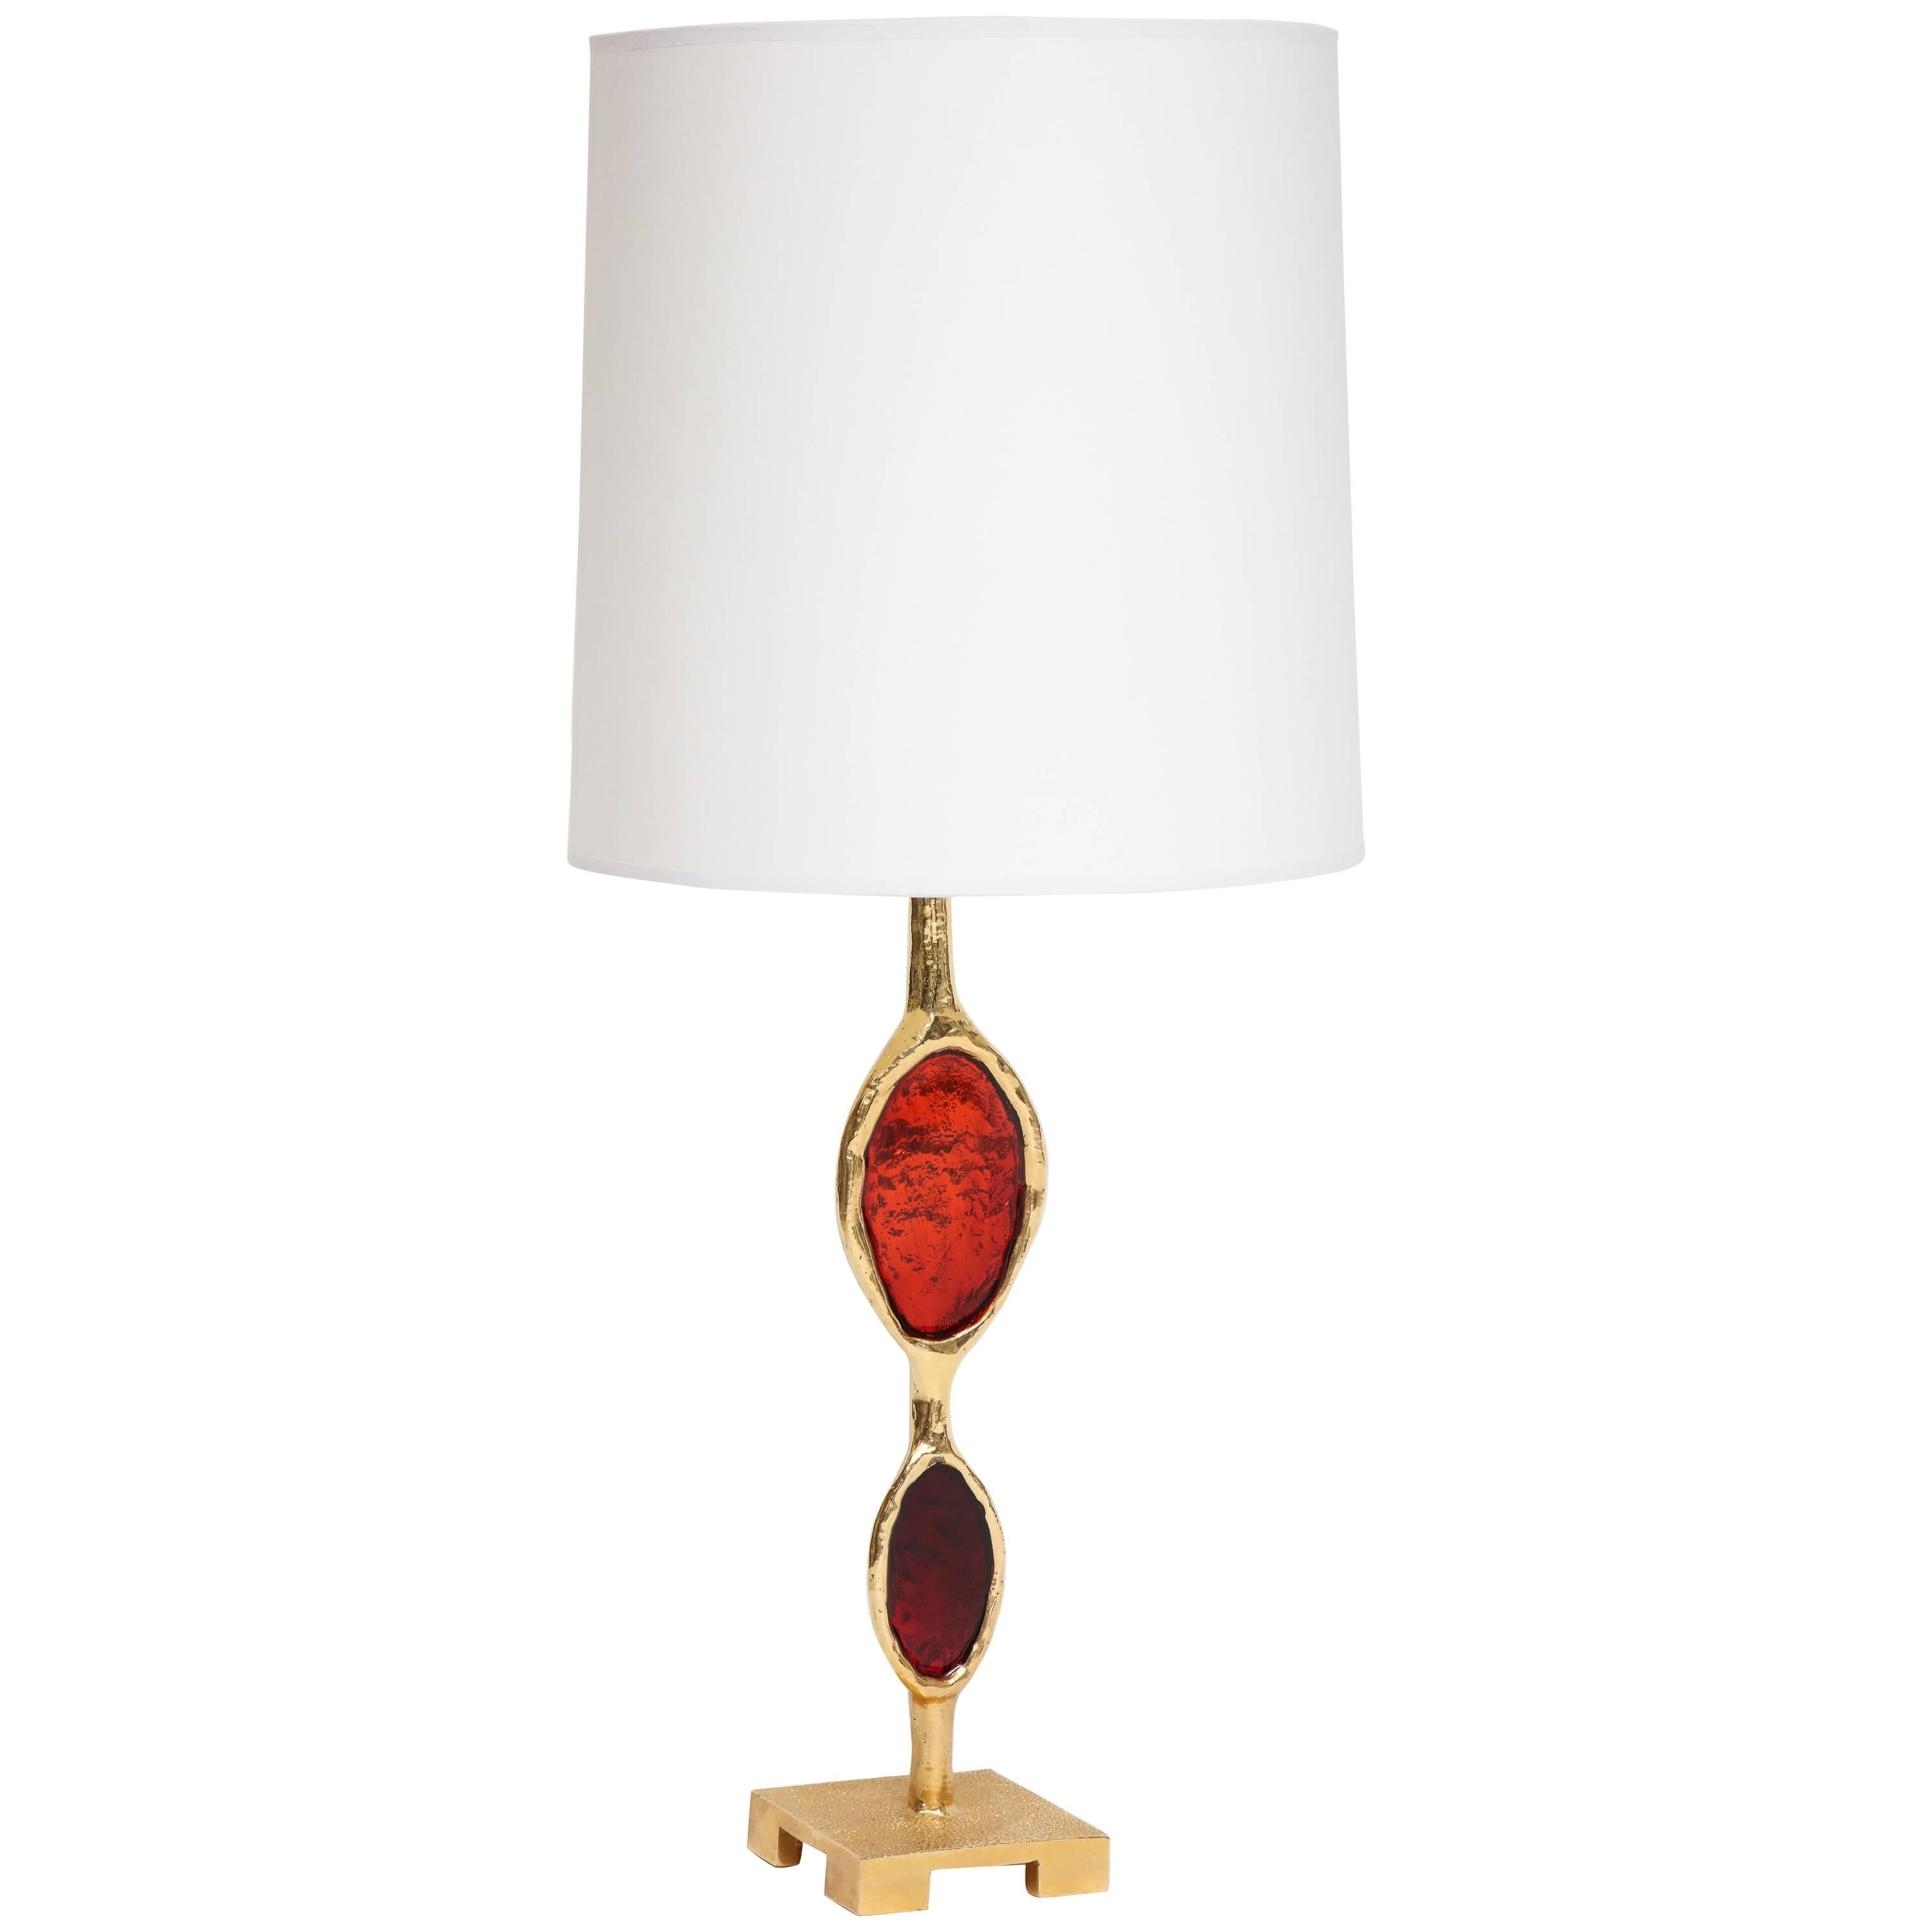 Fondica Bronze Table Lamp with Enameled Red Jewel Sections, 2000s, France